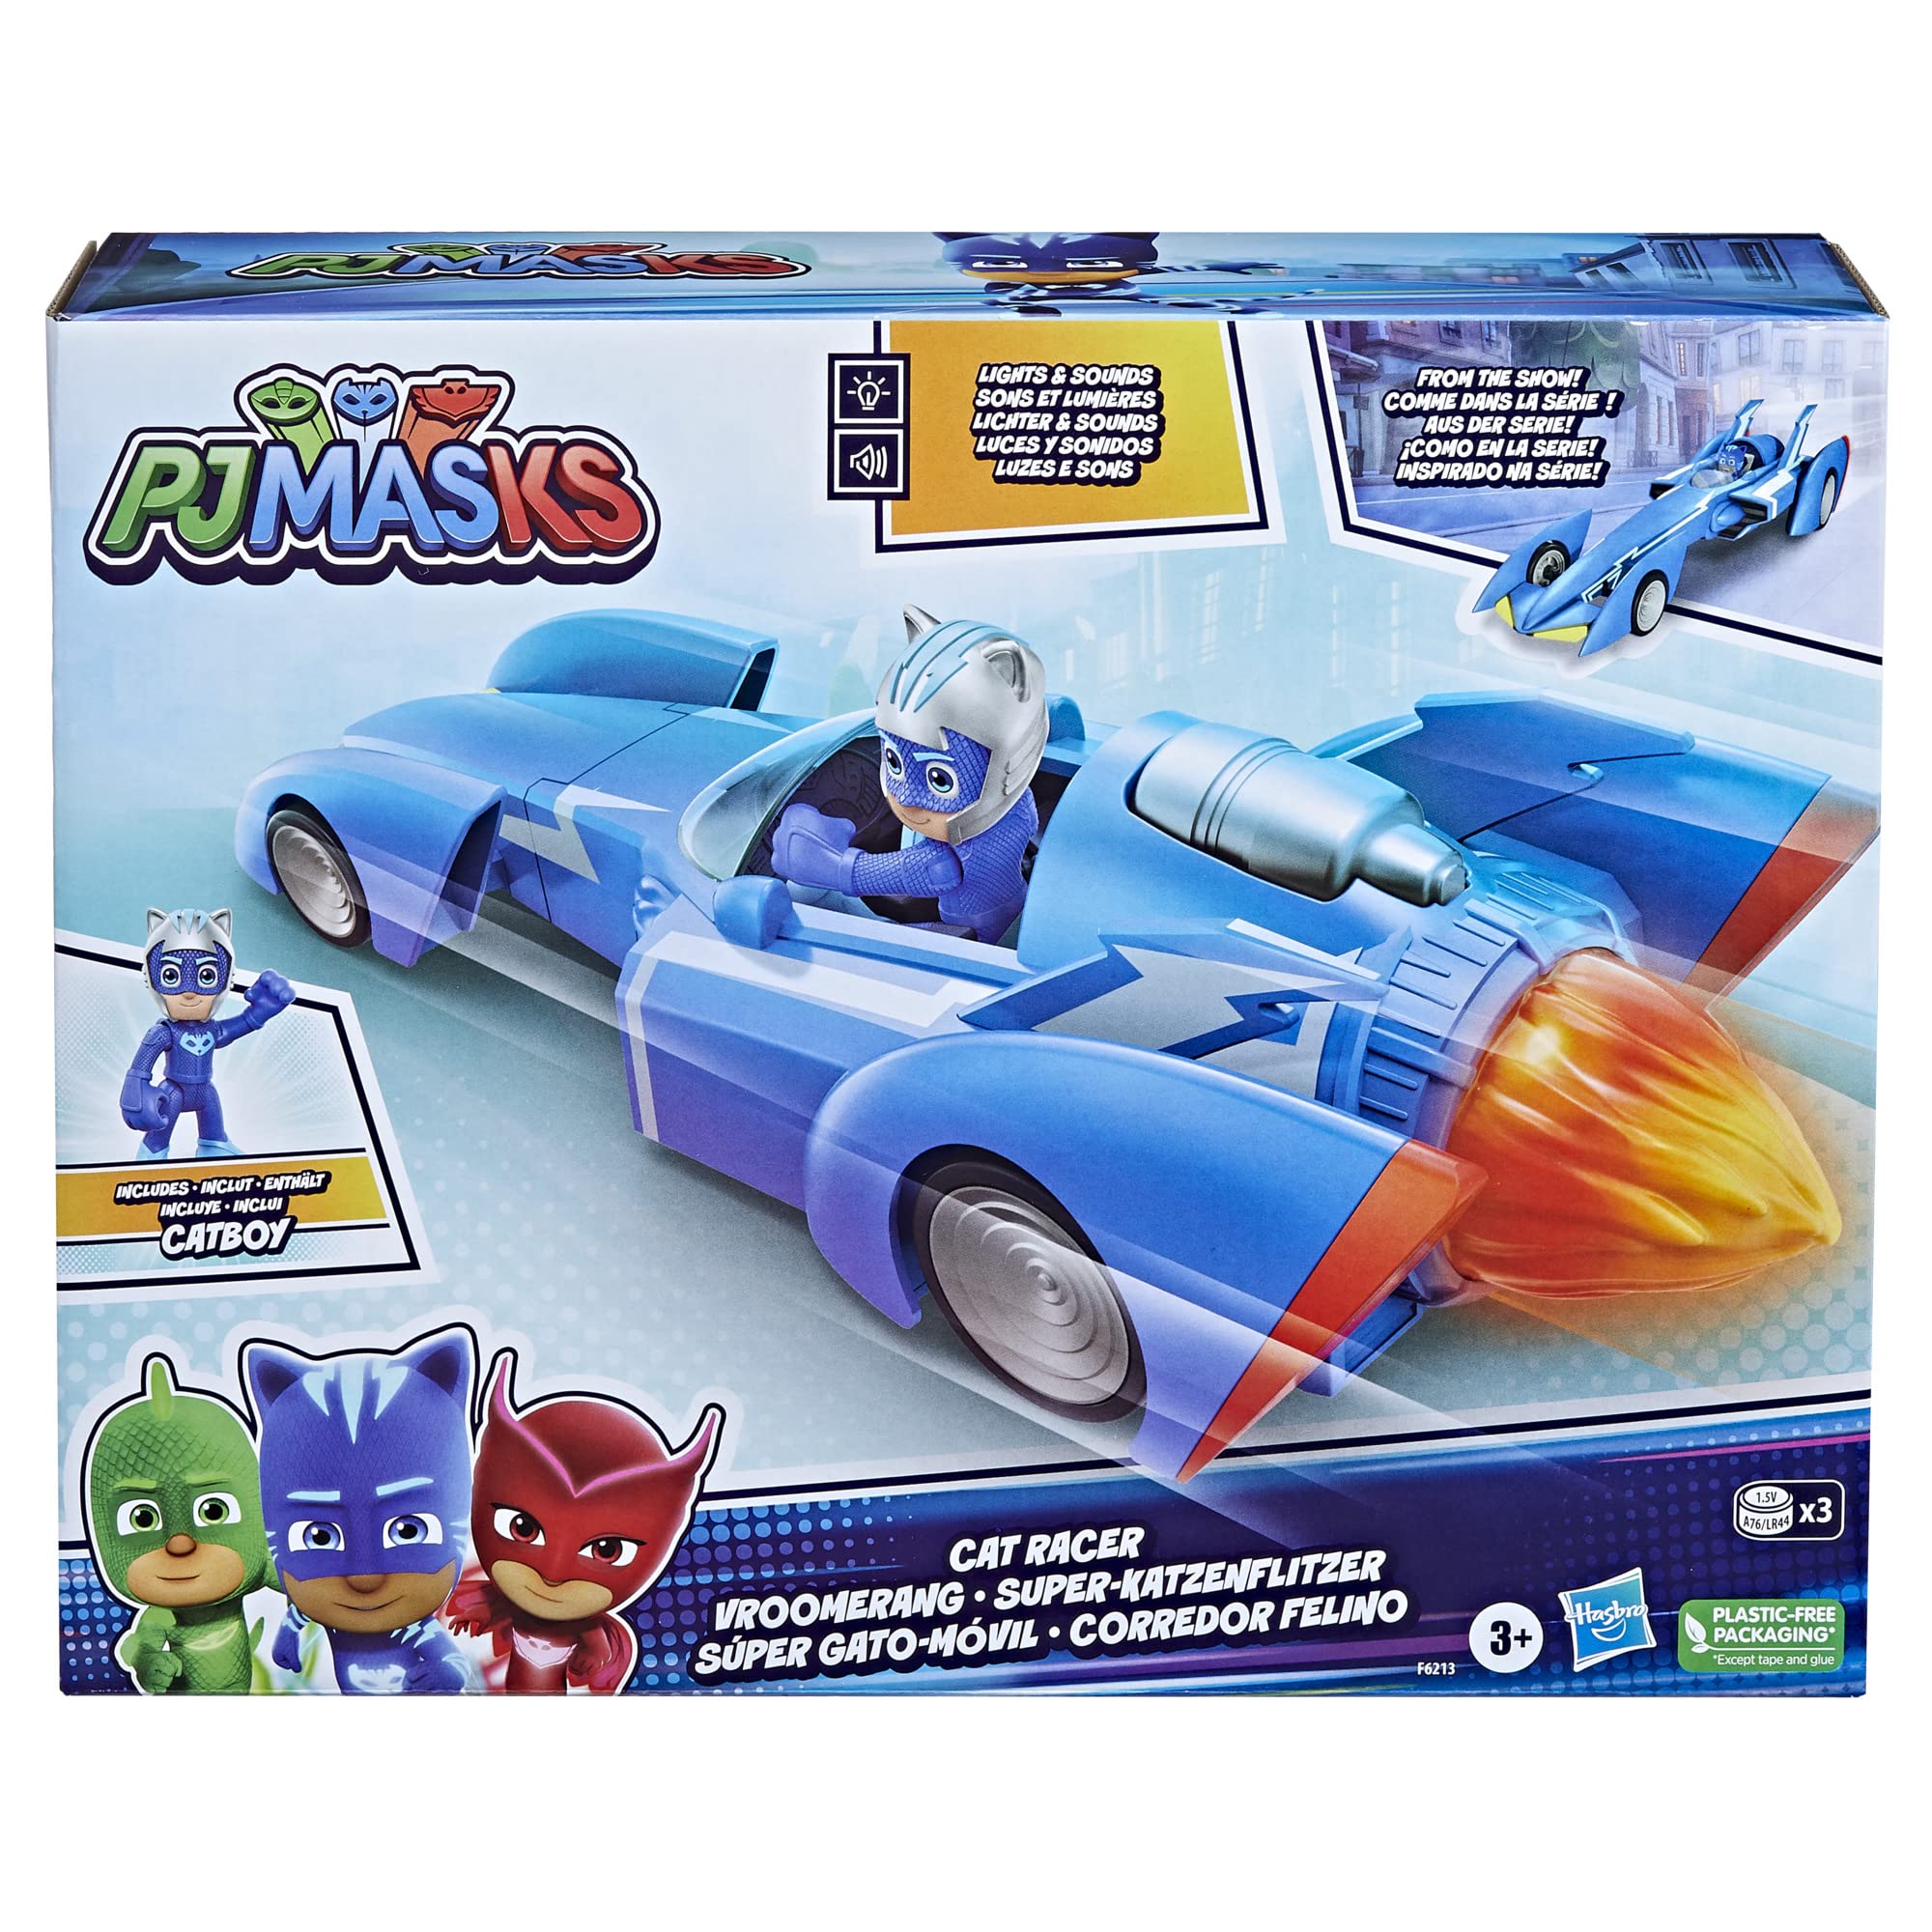 PJ Masks Power Heroes Cat Racer, PJ Masks Toy Car with Lights and Sounds, Preschool Toys for Boys and Girls 3 Years and Up